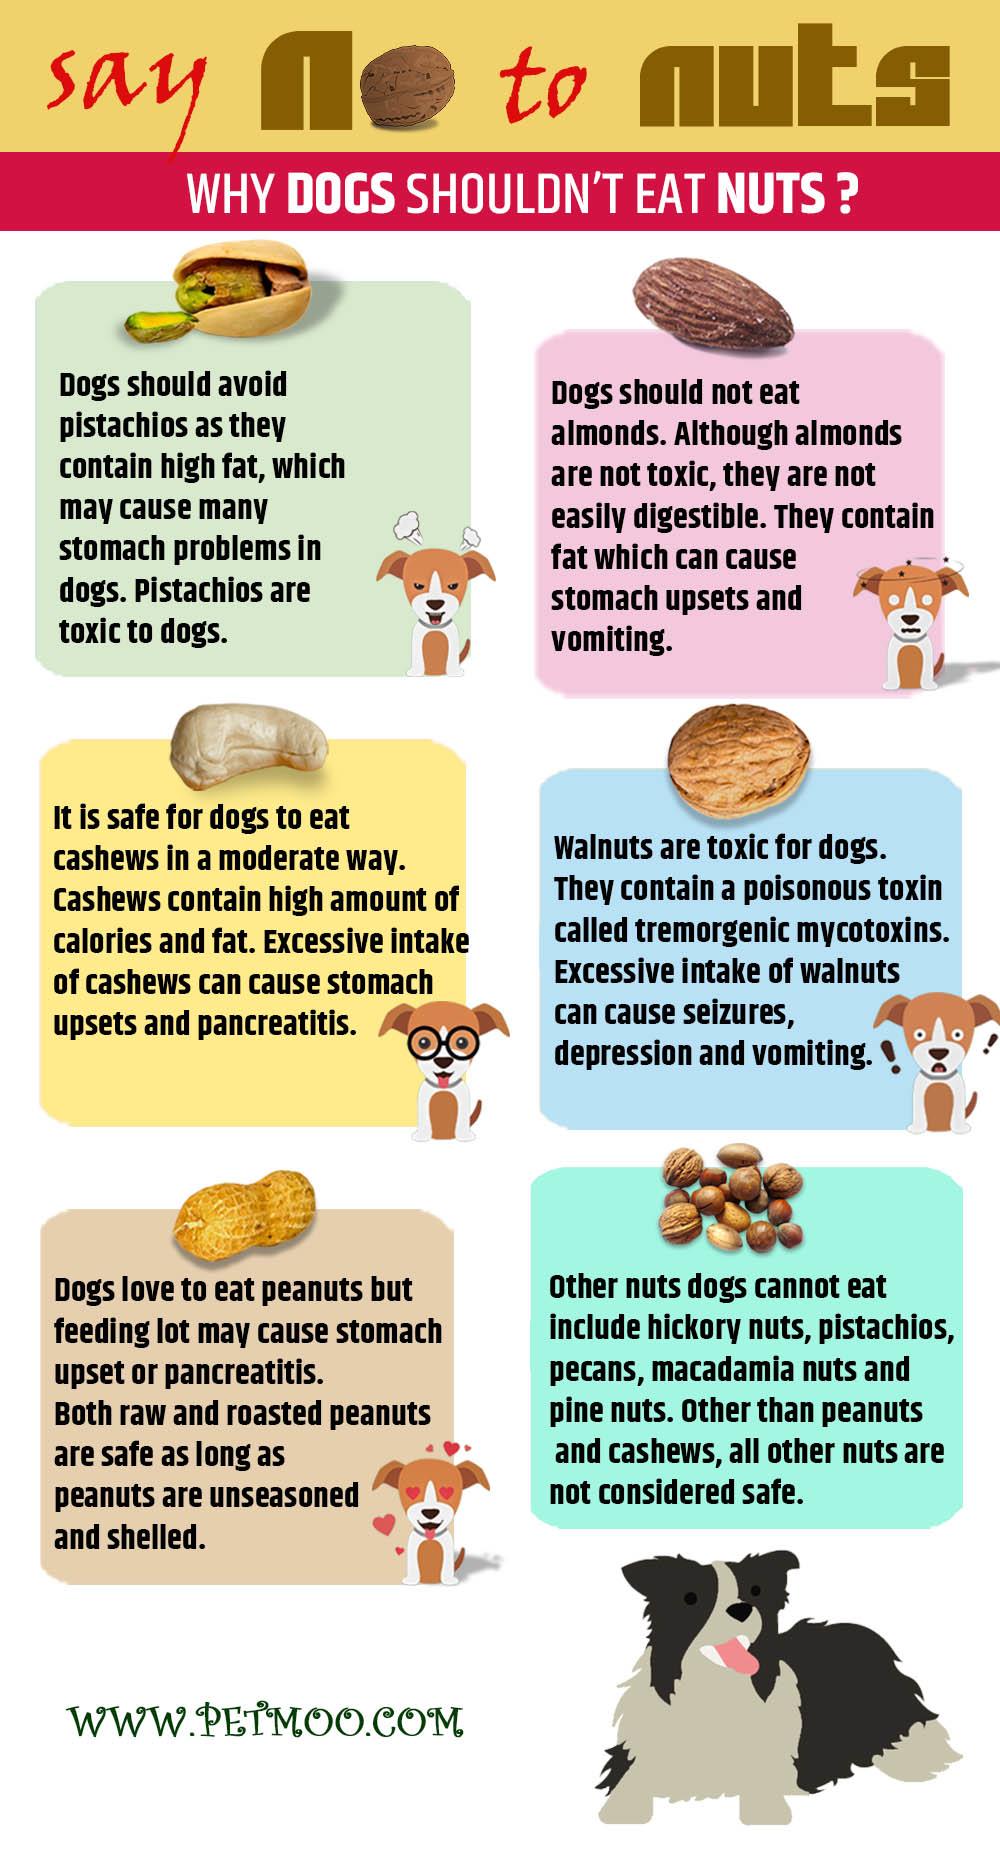 peanuts poisonous to dogs